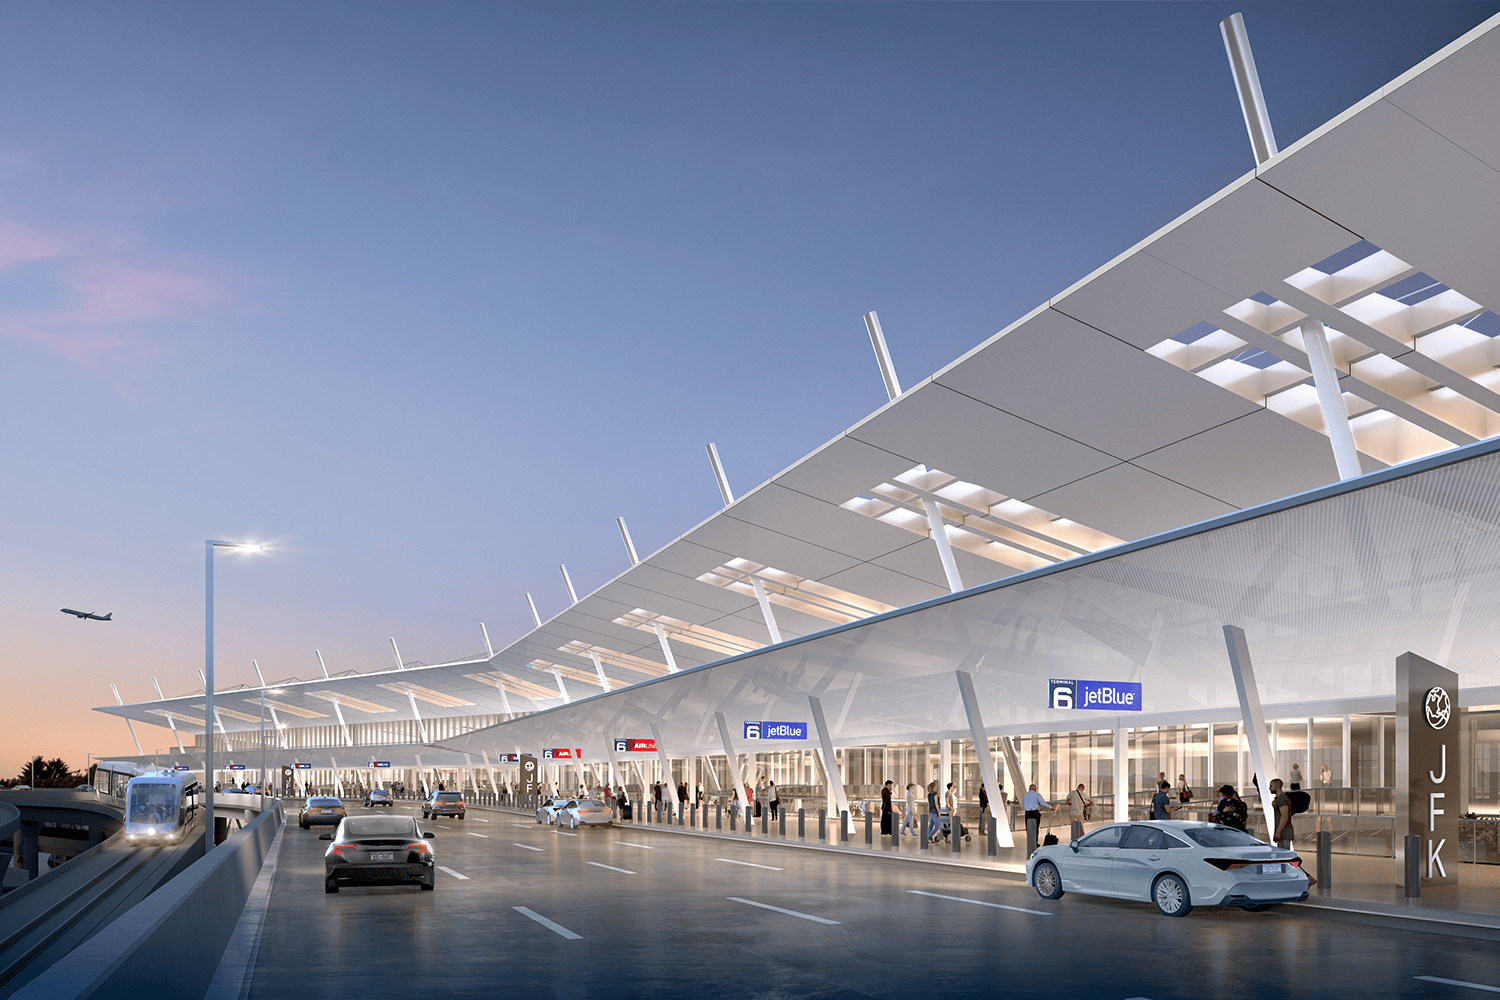 Curbside rendering of the new Terminal 6 